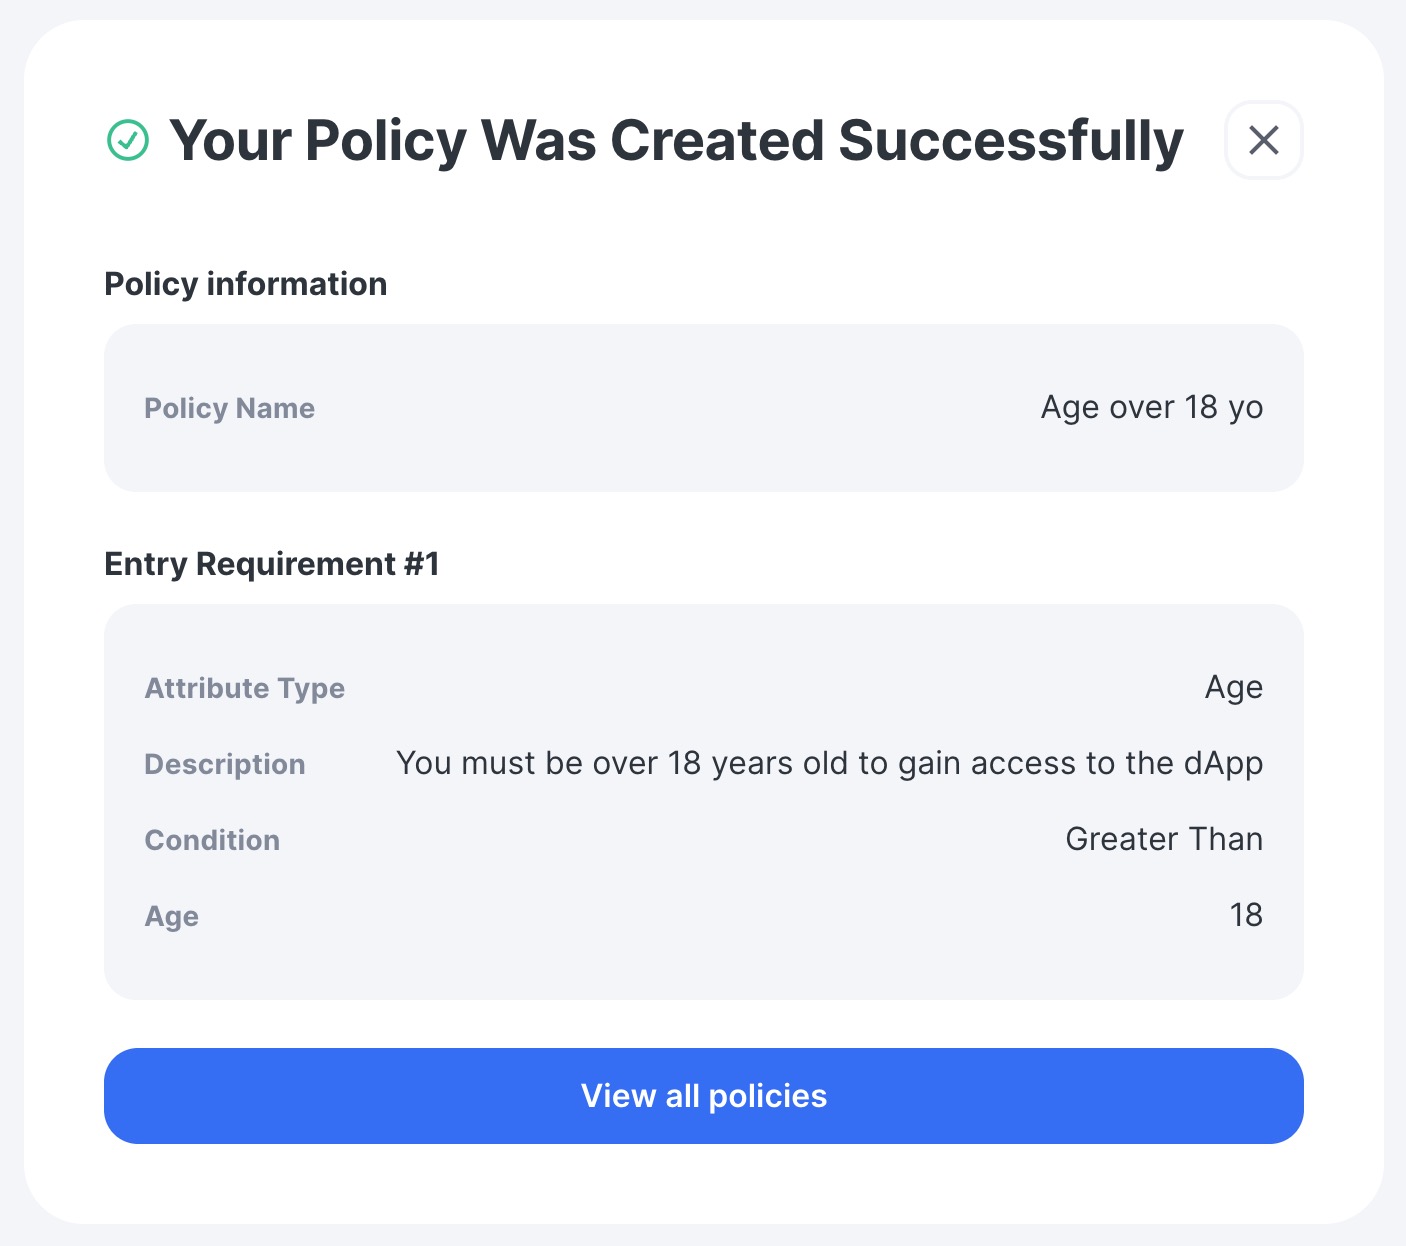 Click View all policies